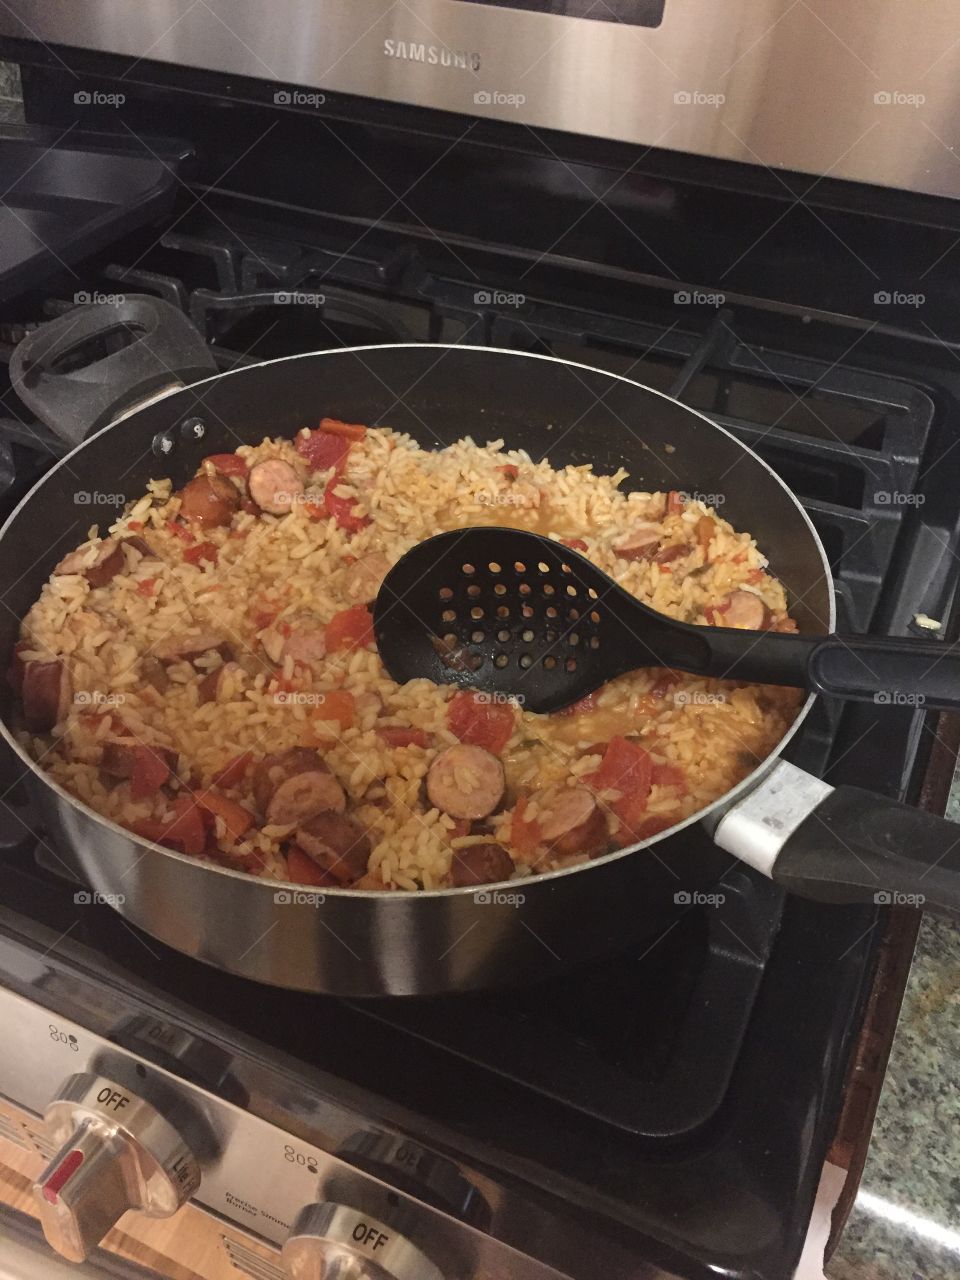 Dirty rice and sausage meal in a pan on stove. 